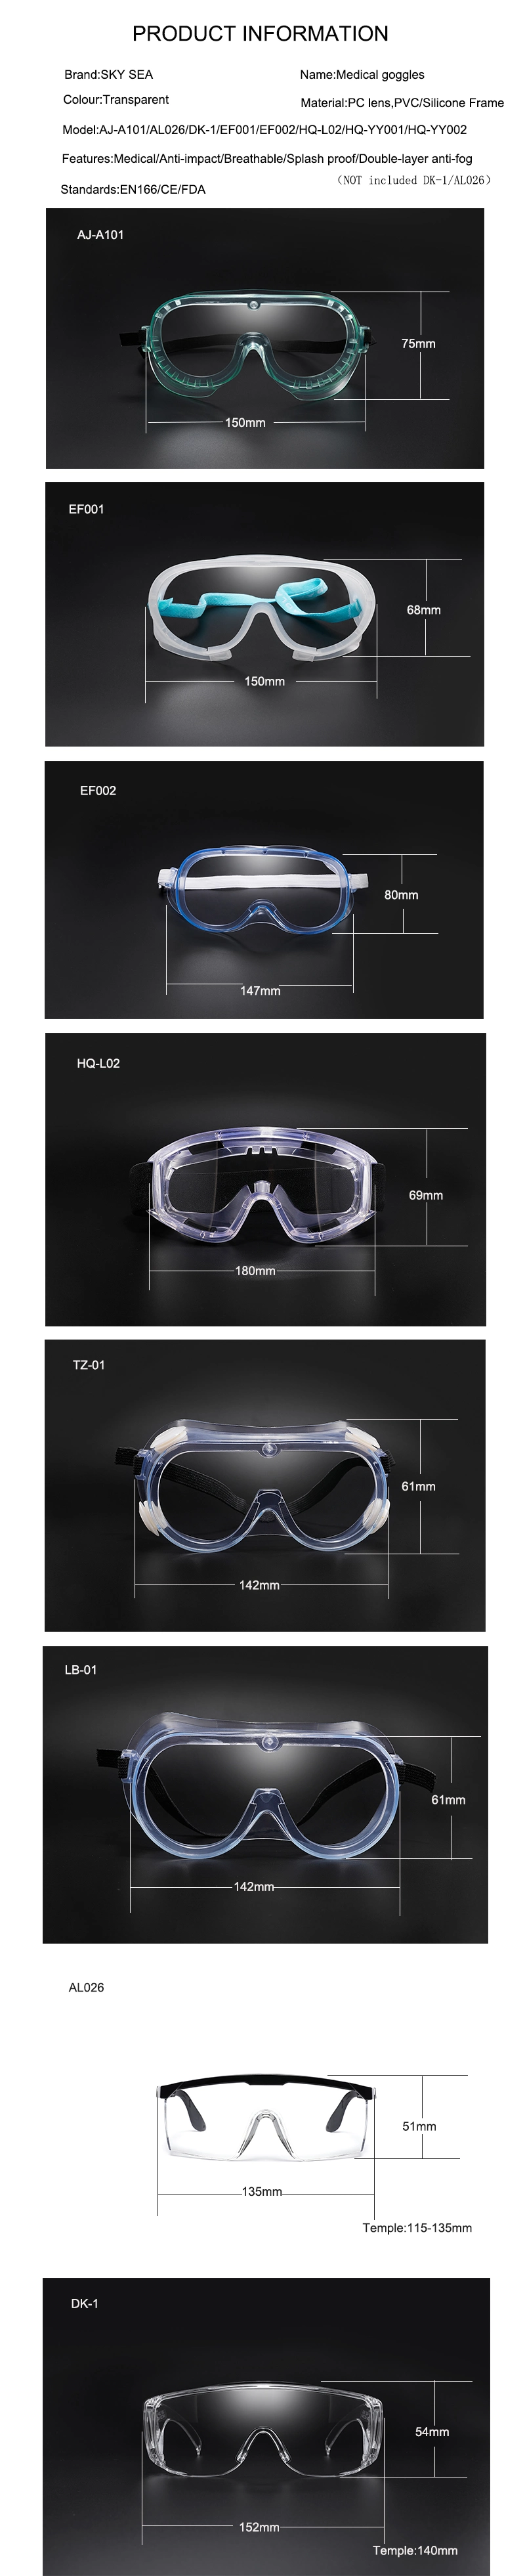 Double Anti Fog Safety Glasses, Protective Safety Glasses, Splash-Proof Goggles